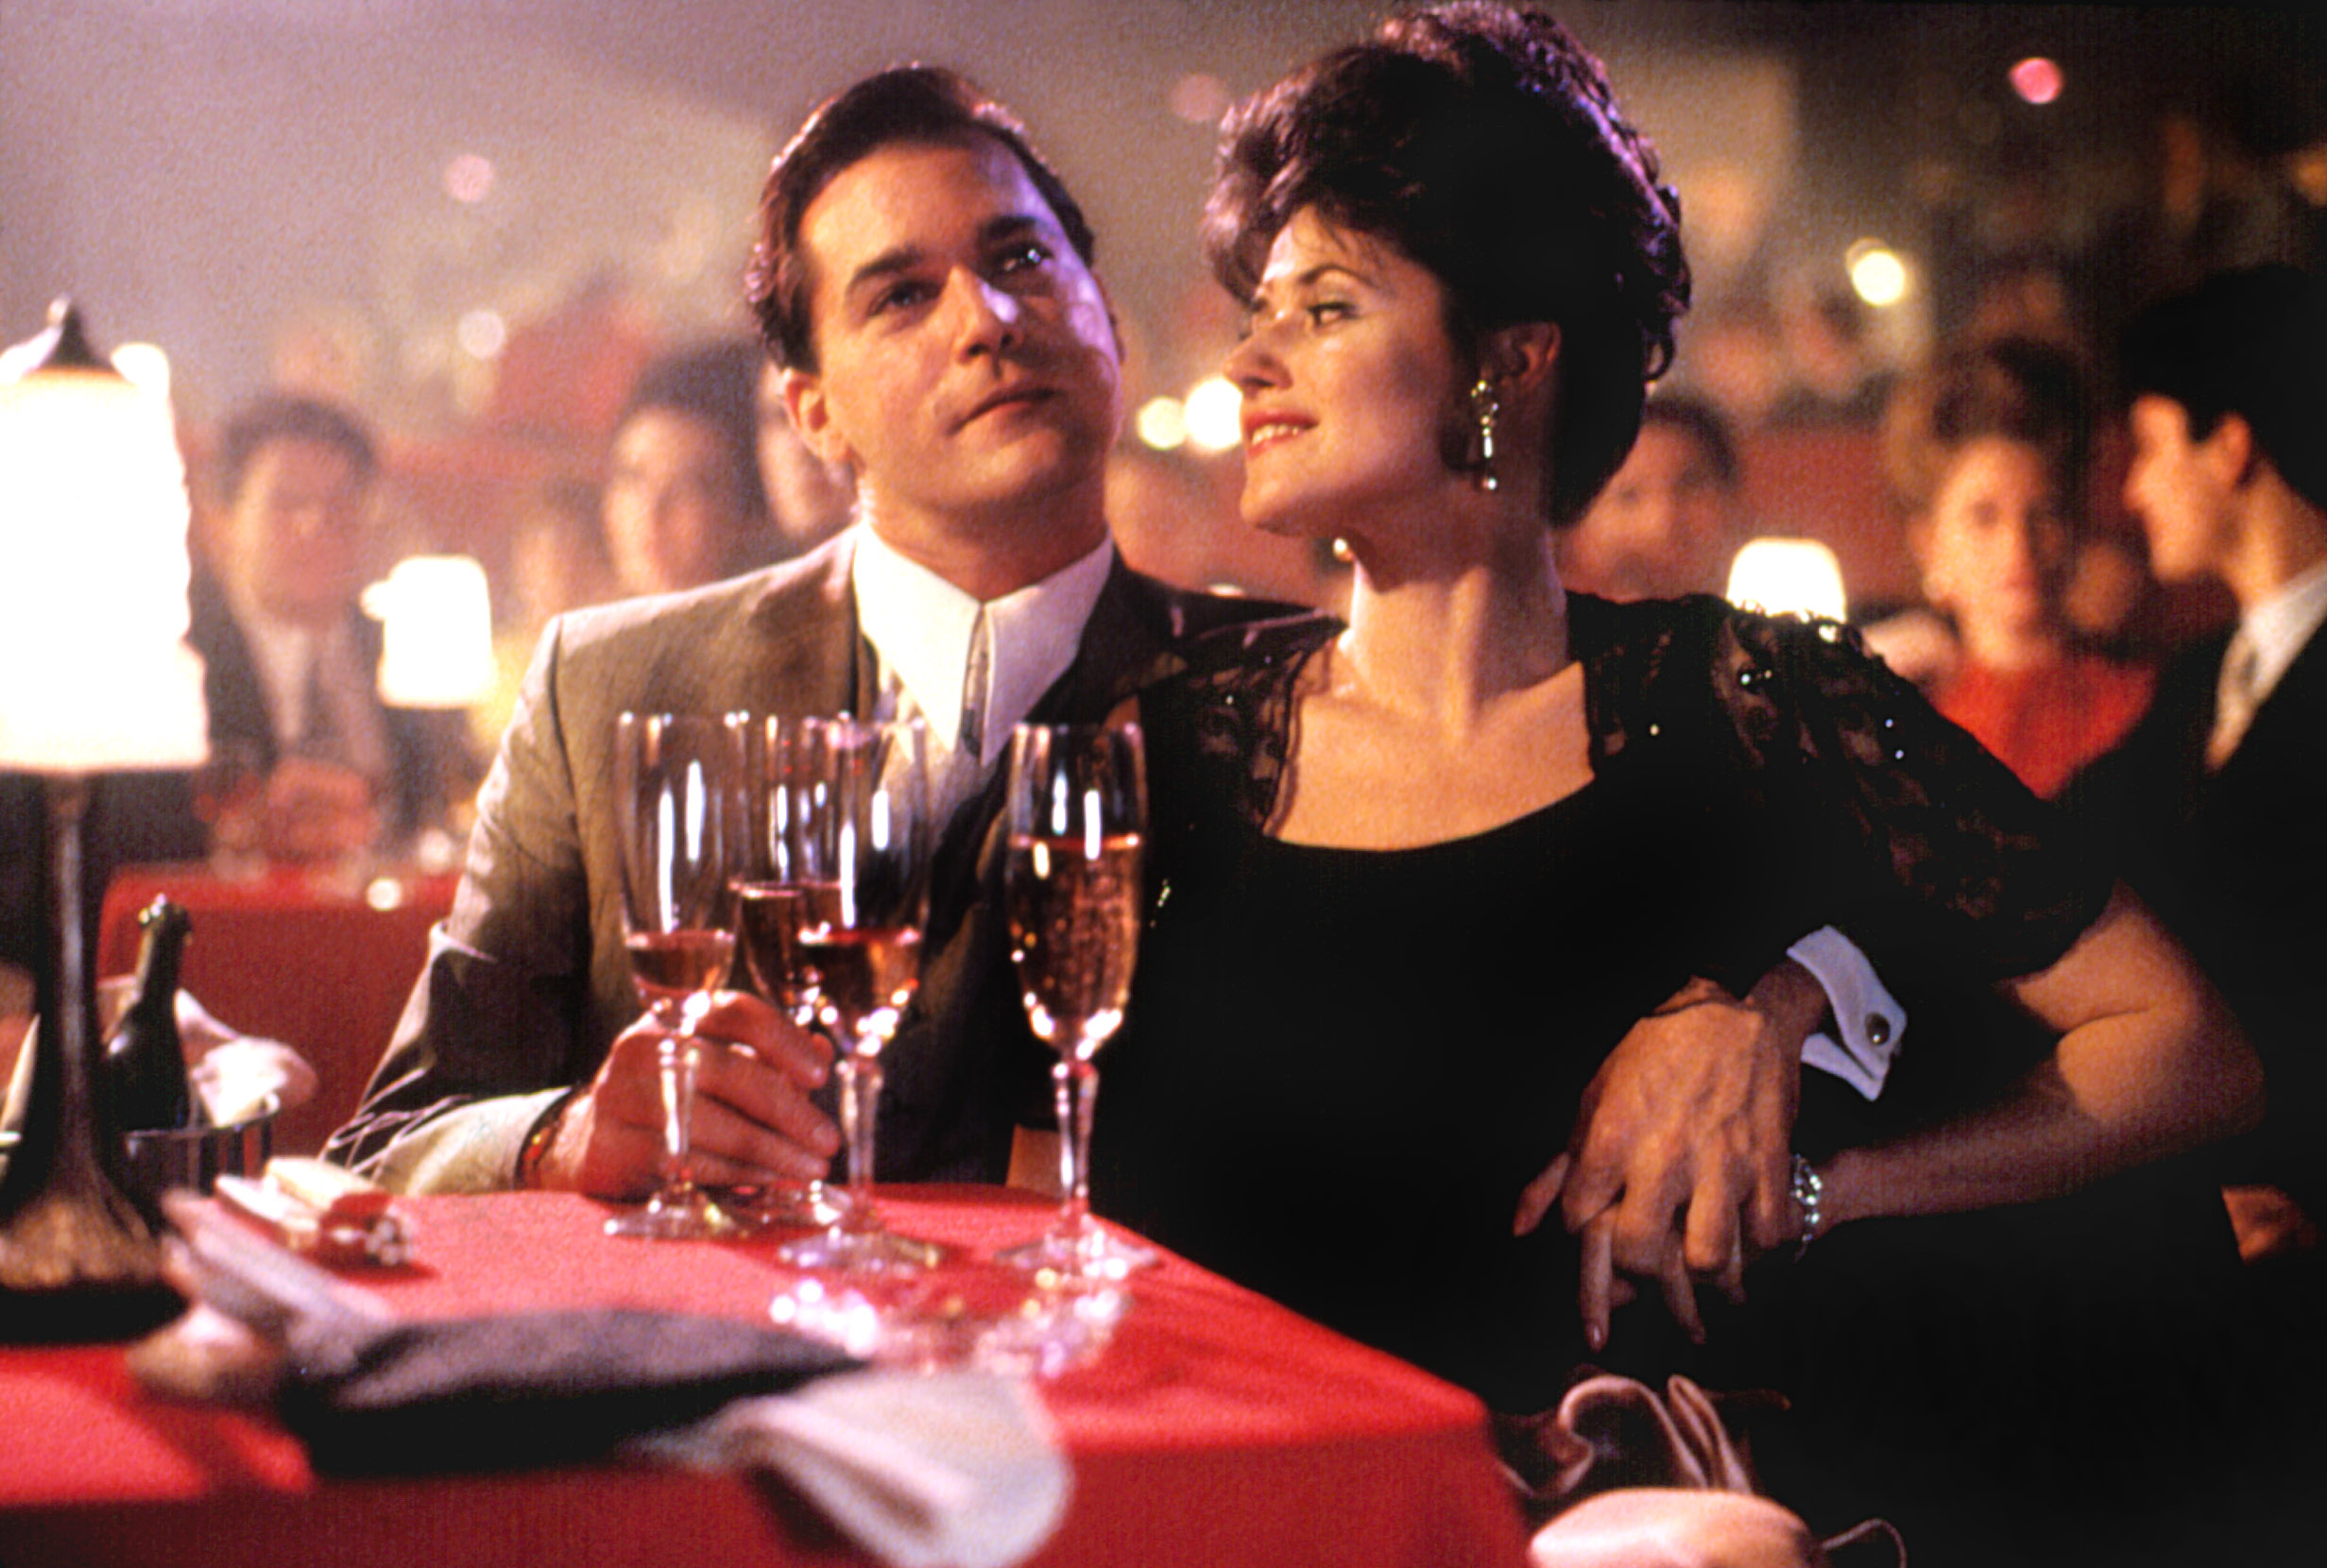 Variety on X: ""I am utterly shattered to hear this terrible news," wrote Lorraine Bracco. "People will come up & tell me their favorite movie is Goodfellas. They always ask what was